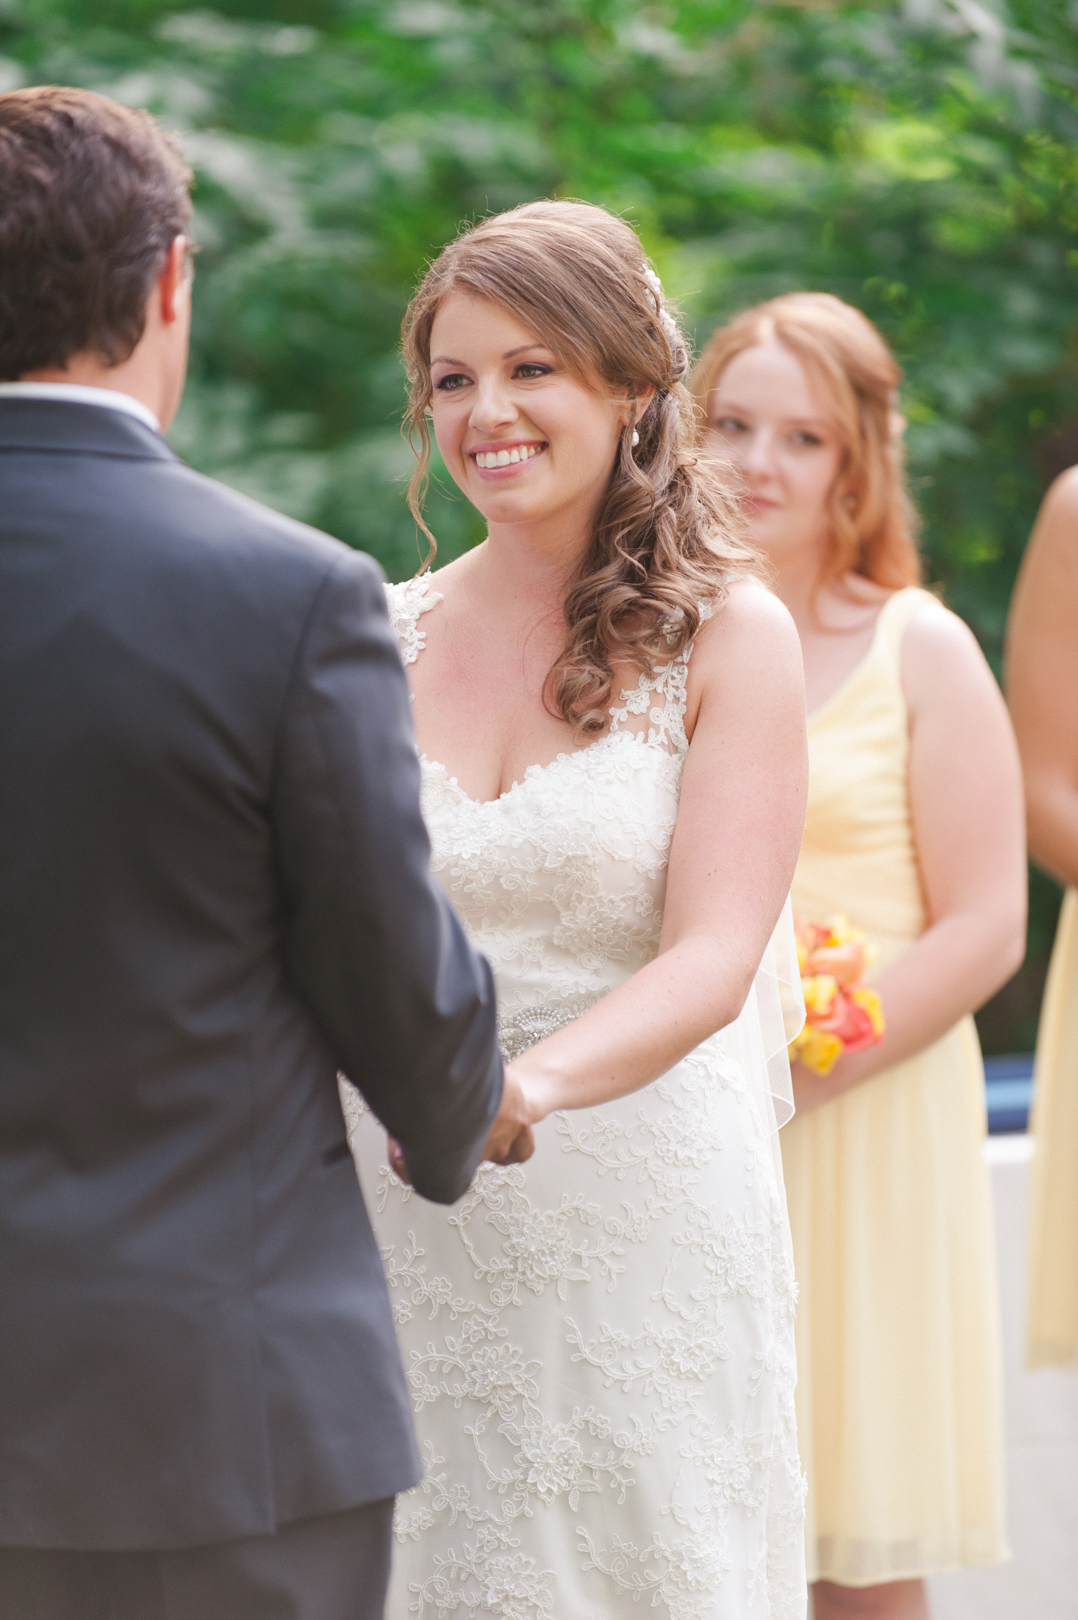 Bride smiling at the groom during the ceremony